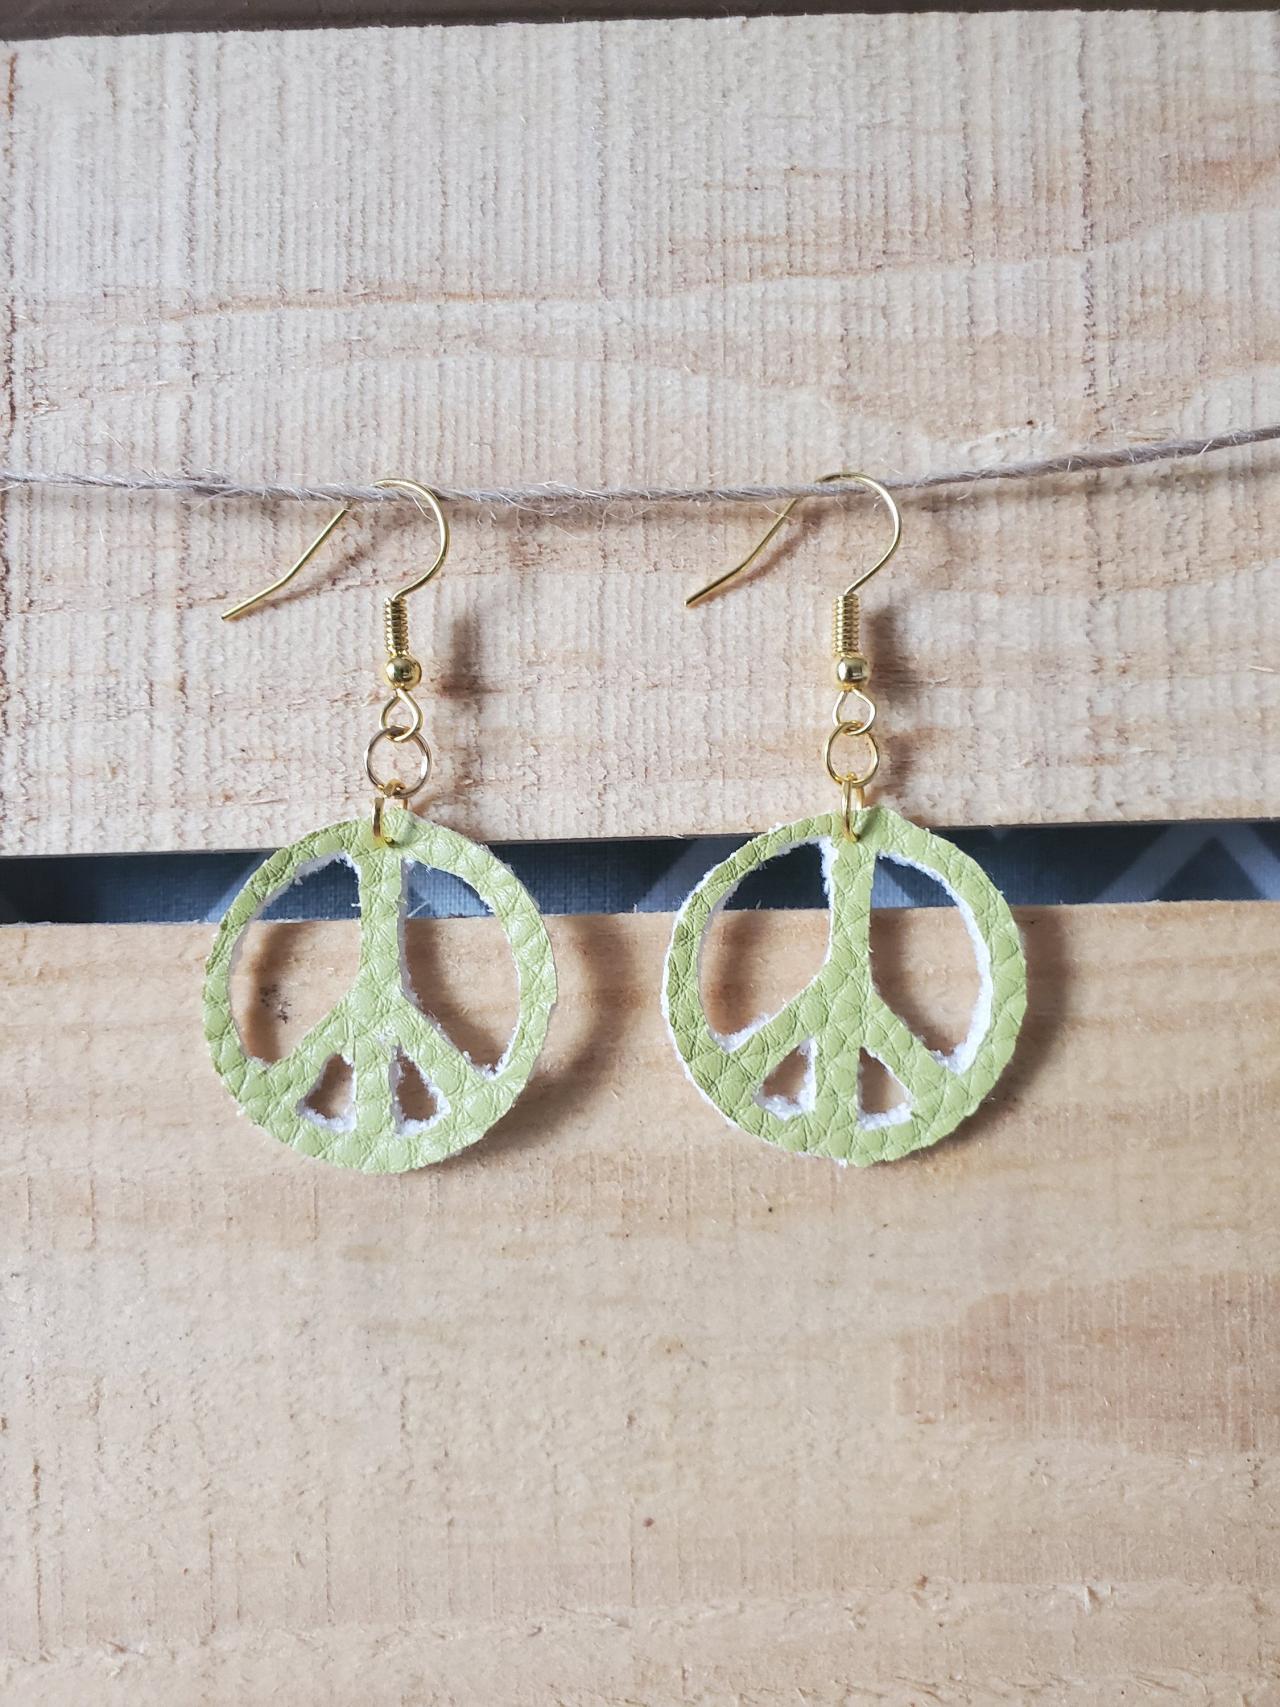 Peace Sign Earrings, Hippie Style Jewelry, Gifts for Her, Leather Dangles, Boho Gifts, Girls Earrings, Dangle Earrings for Girls, Boho Chic